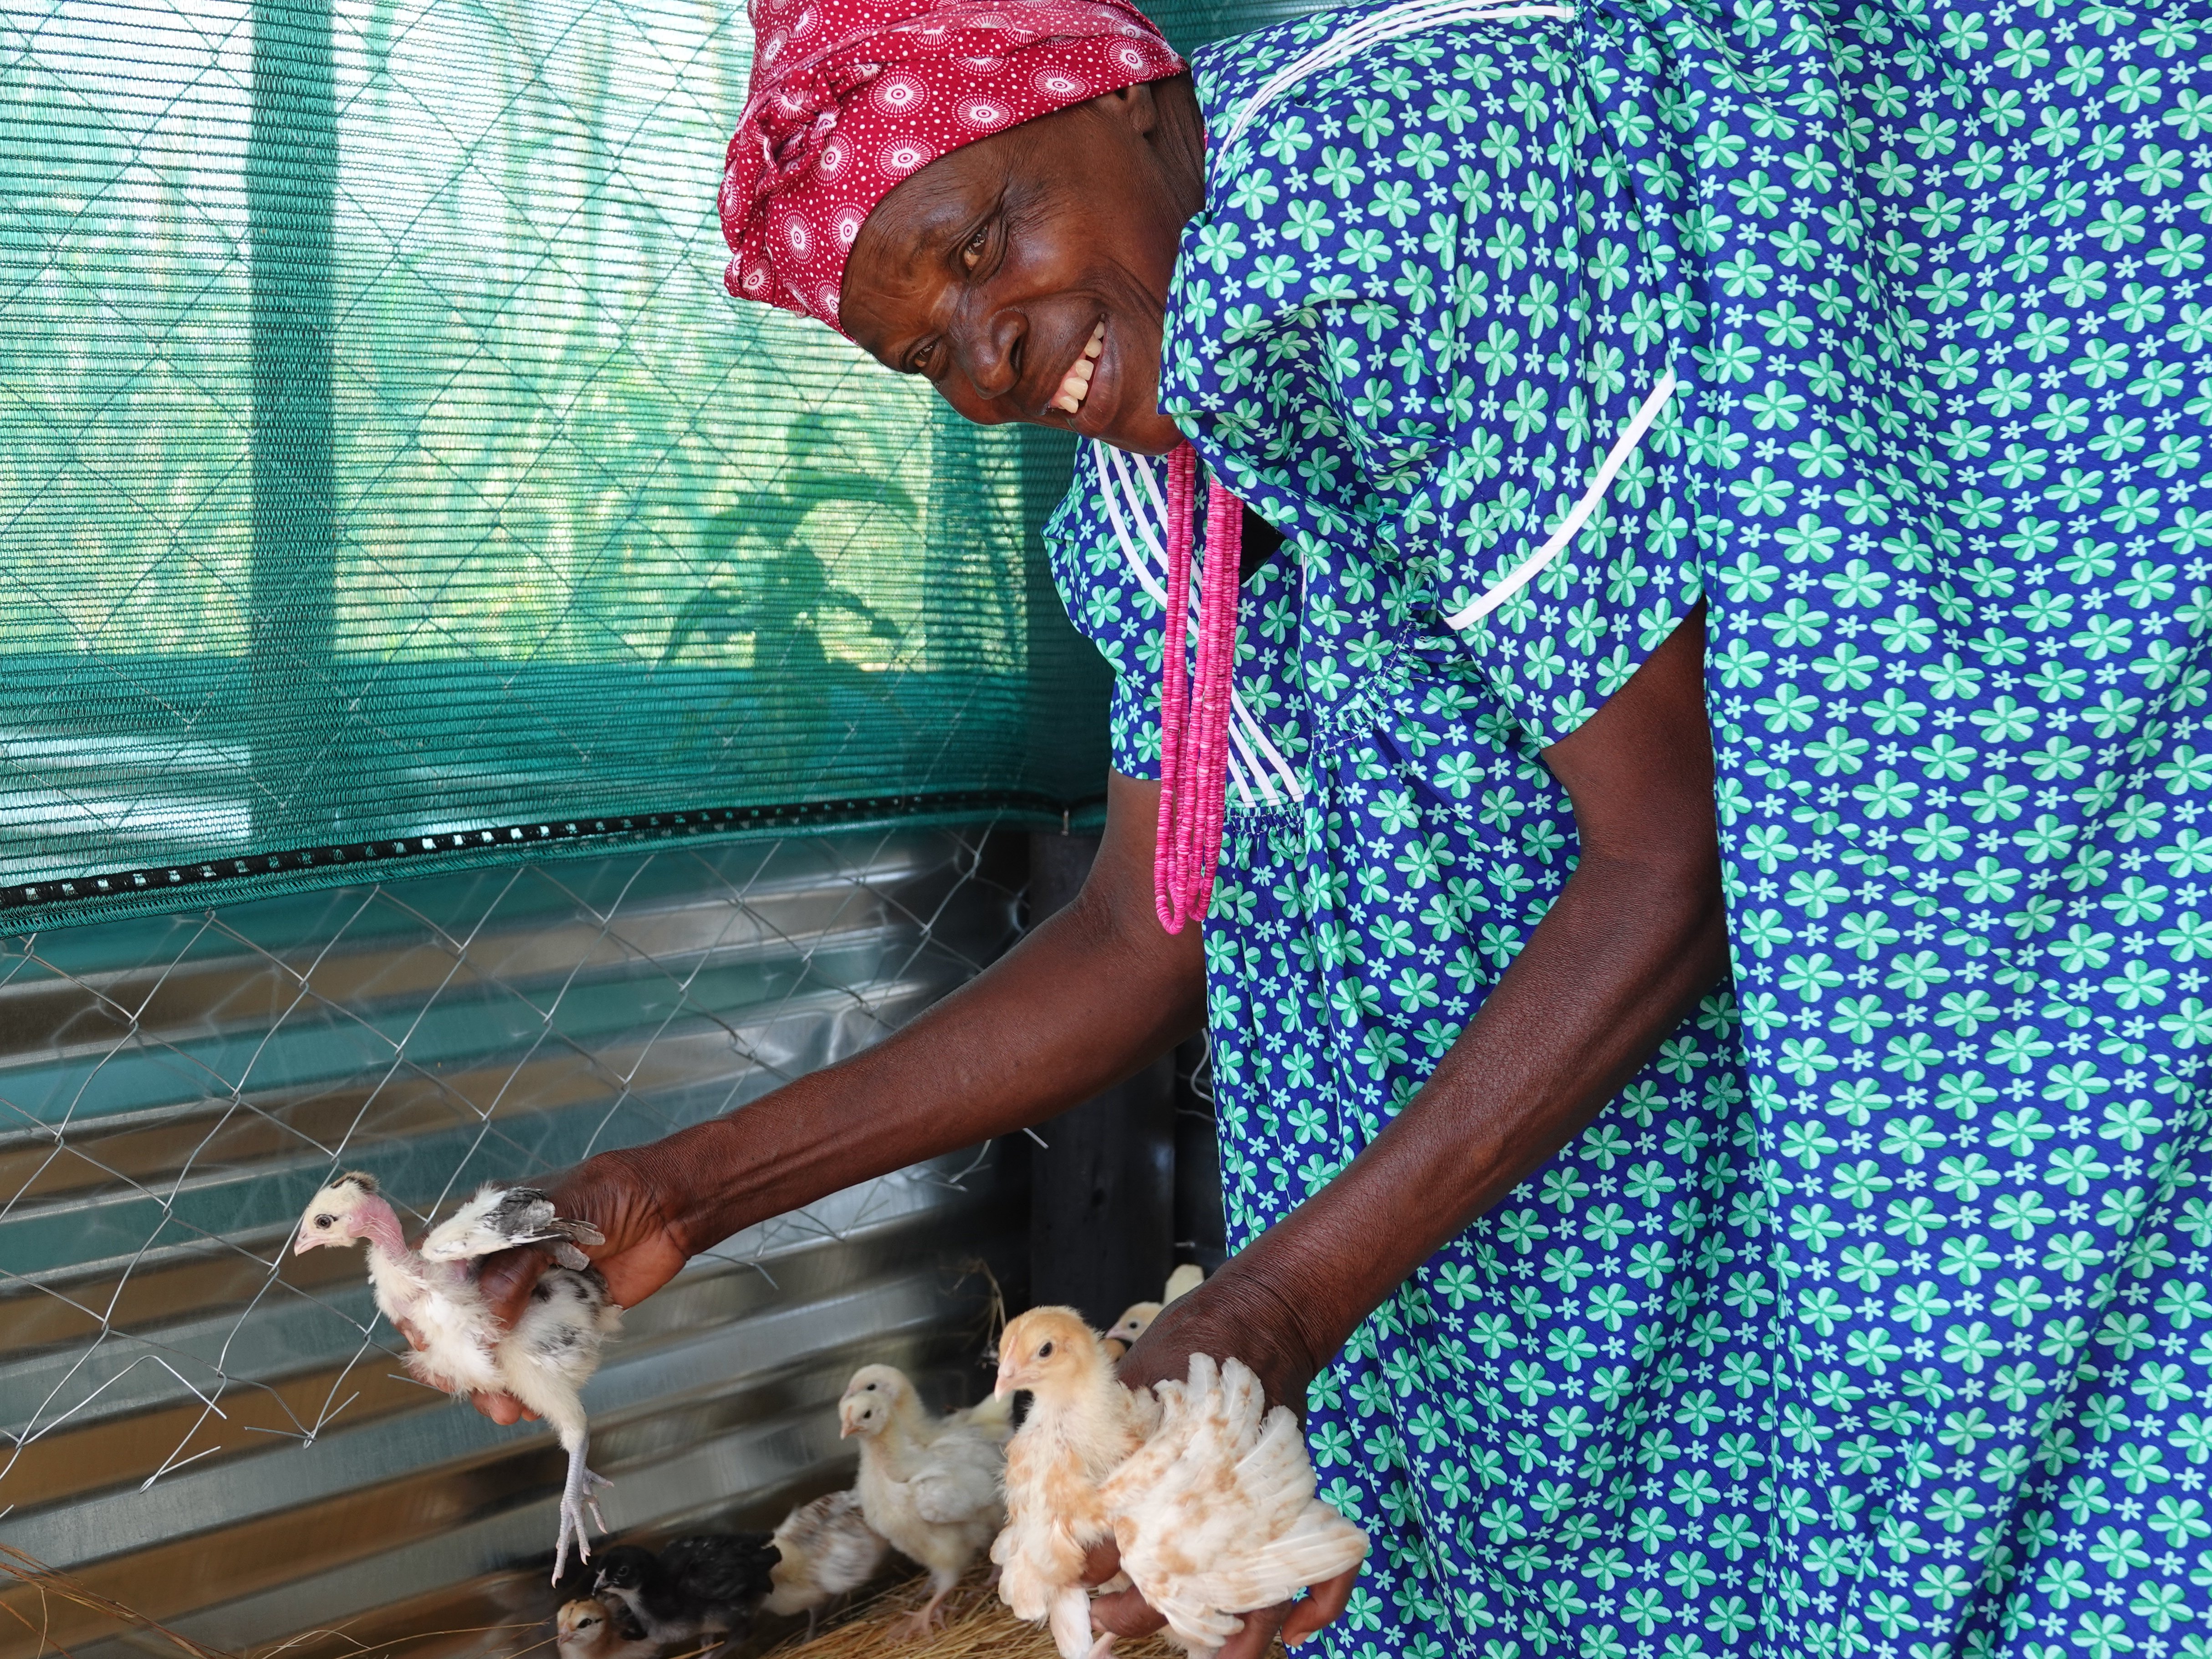 Mrs. Loide and her chicks